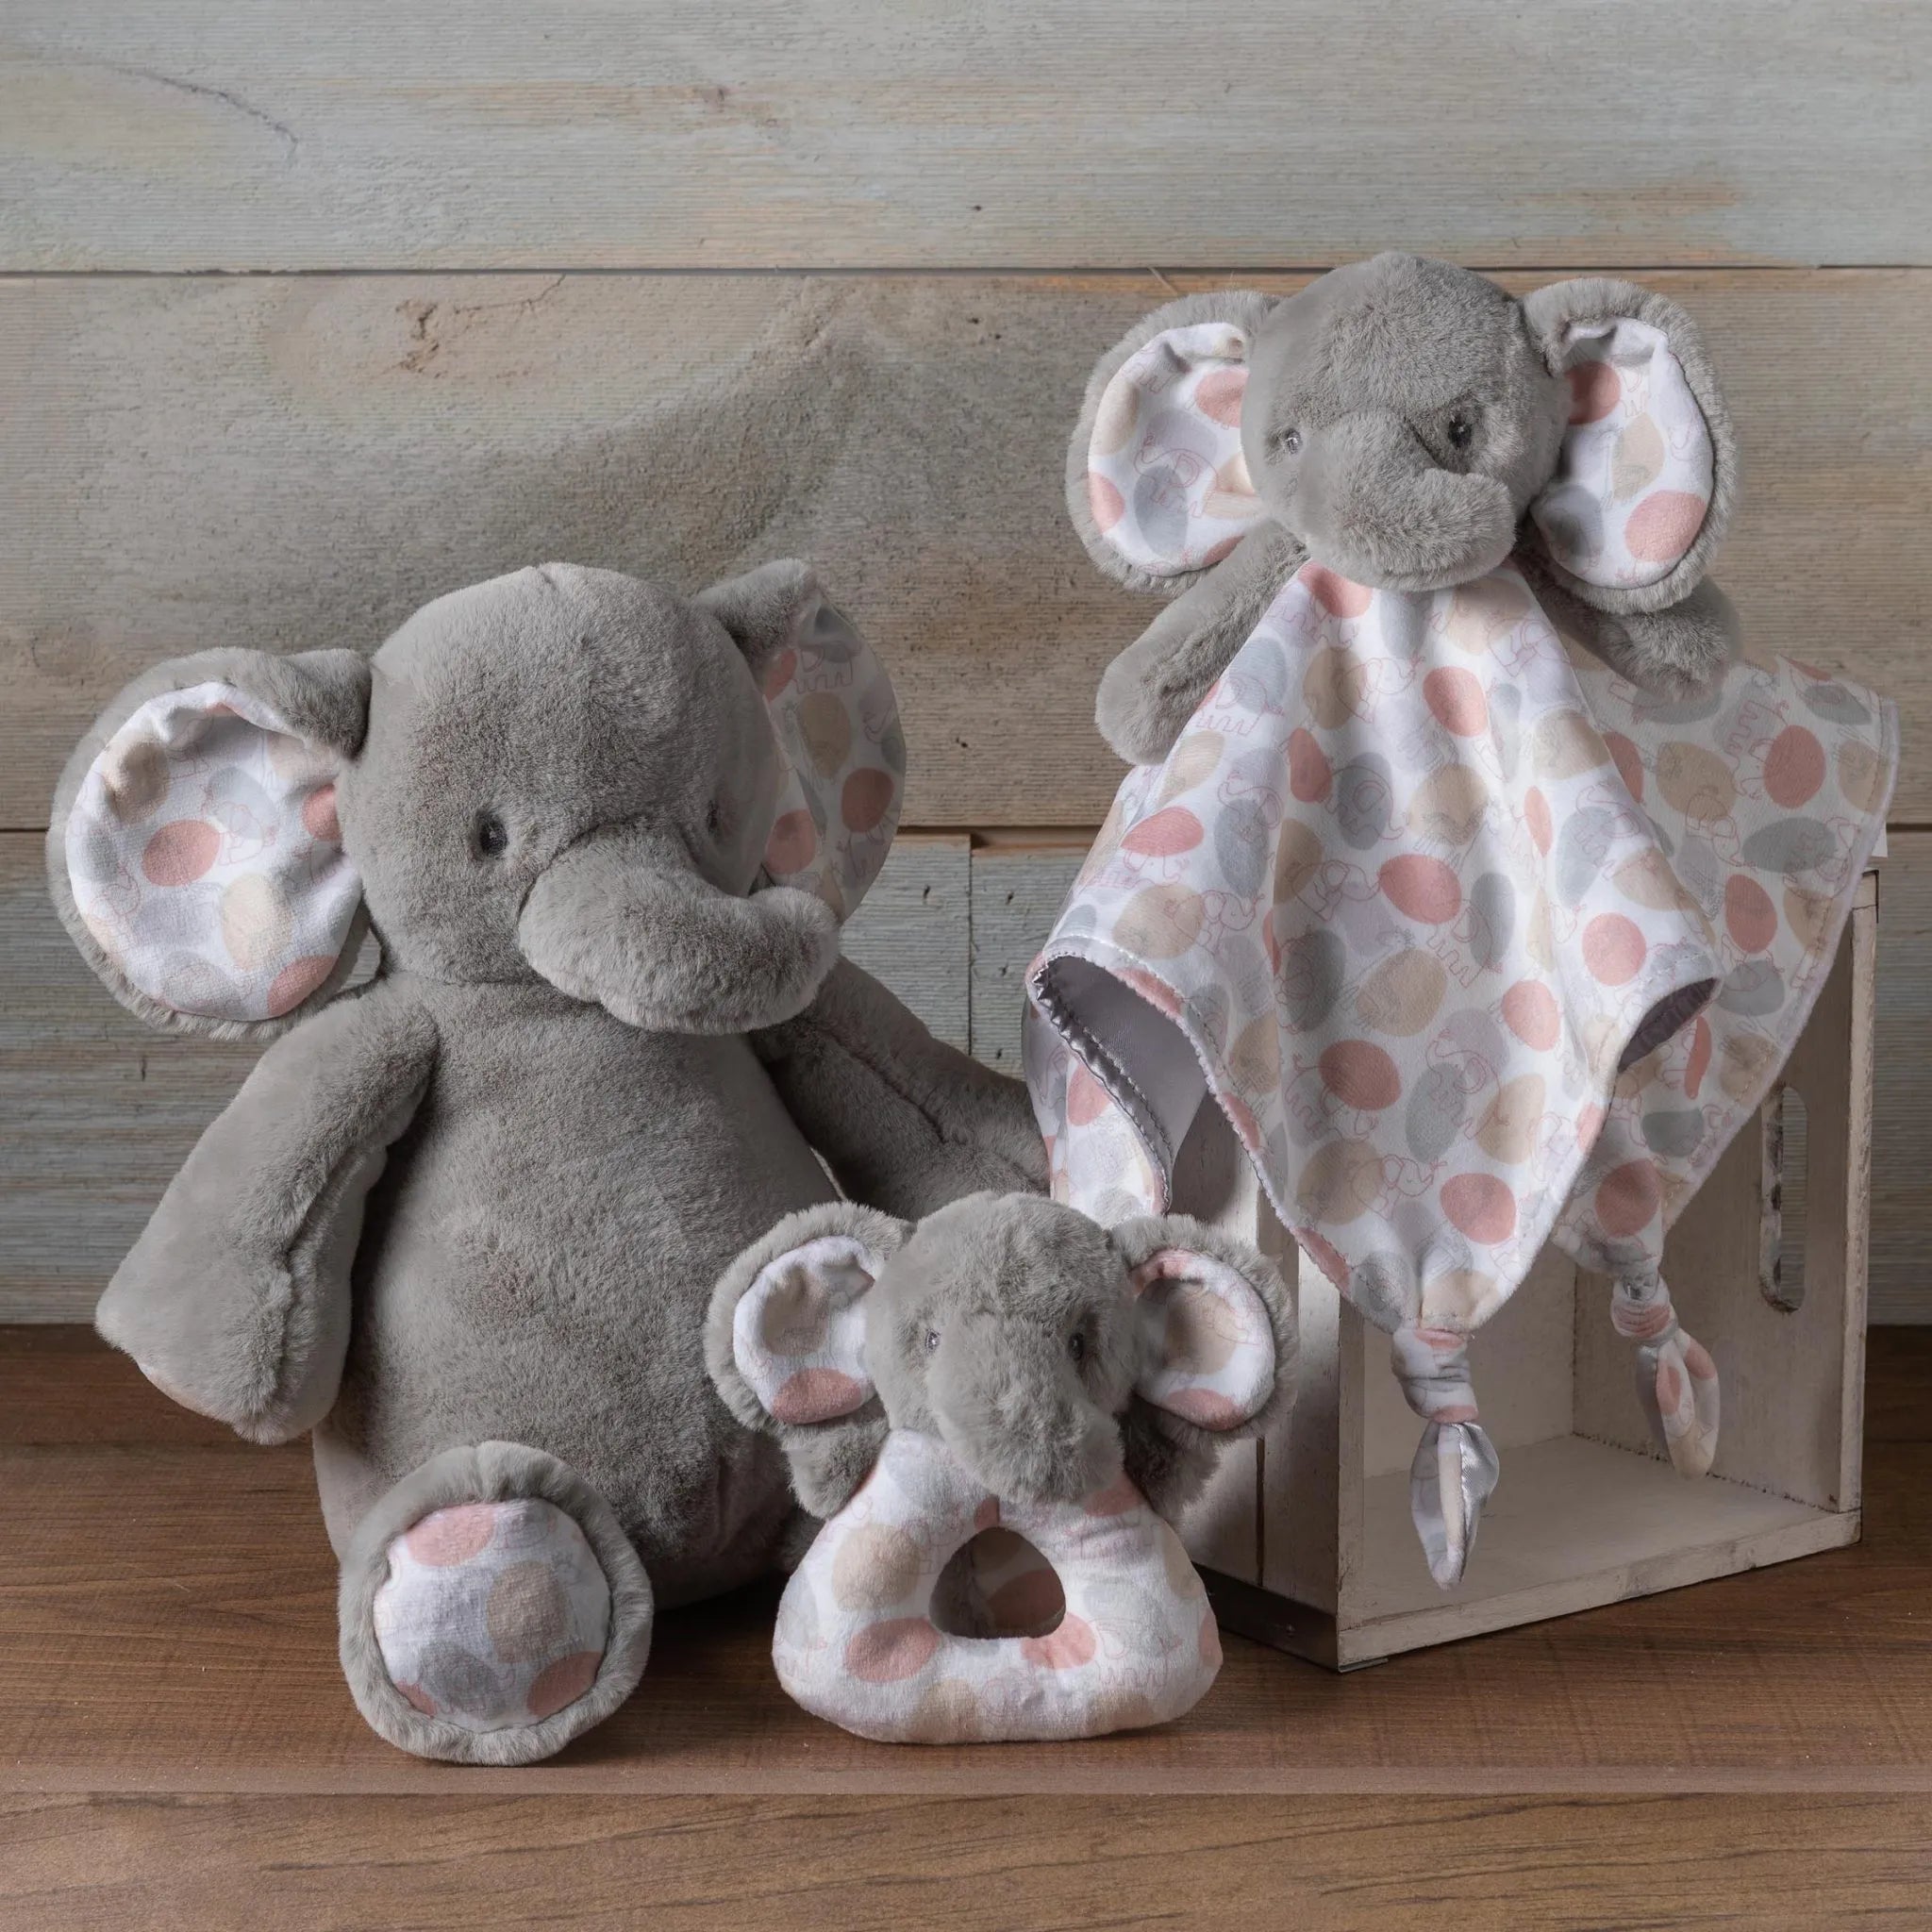 New baby hamper basket. Wicker effect hamper keepsake. Includes chocolates for the new parents, personalisable elephant, baby blanket, baby booties.